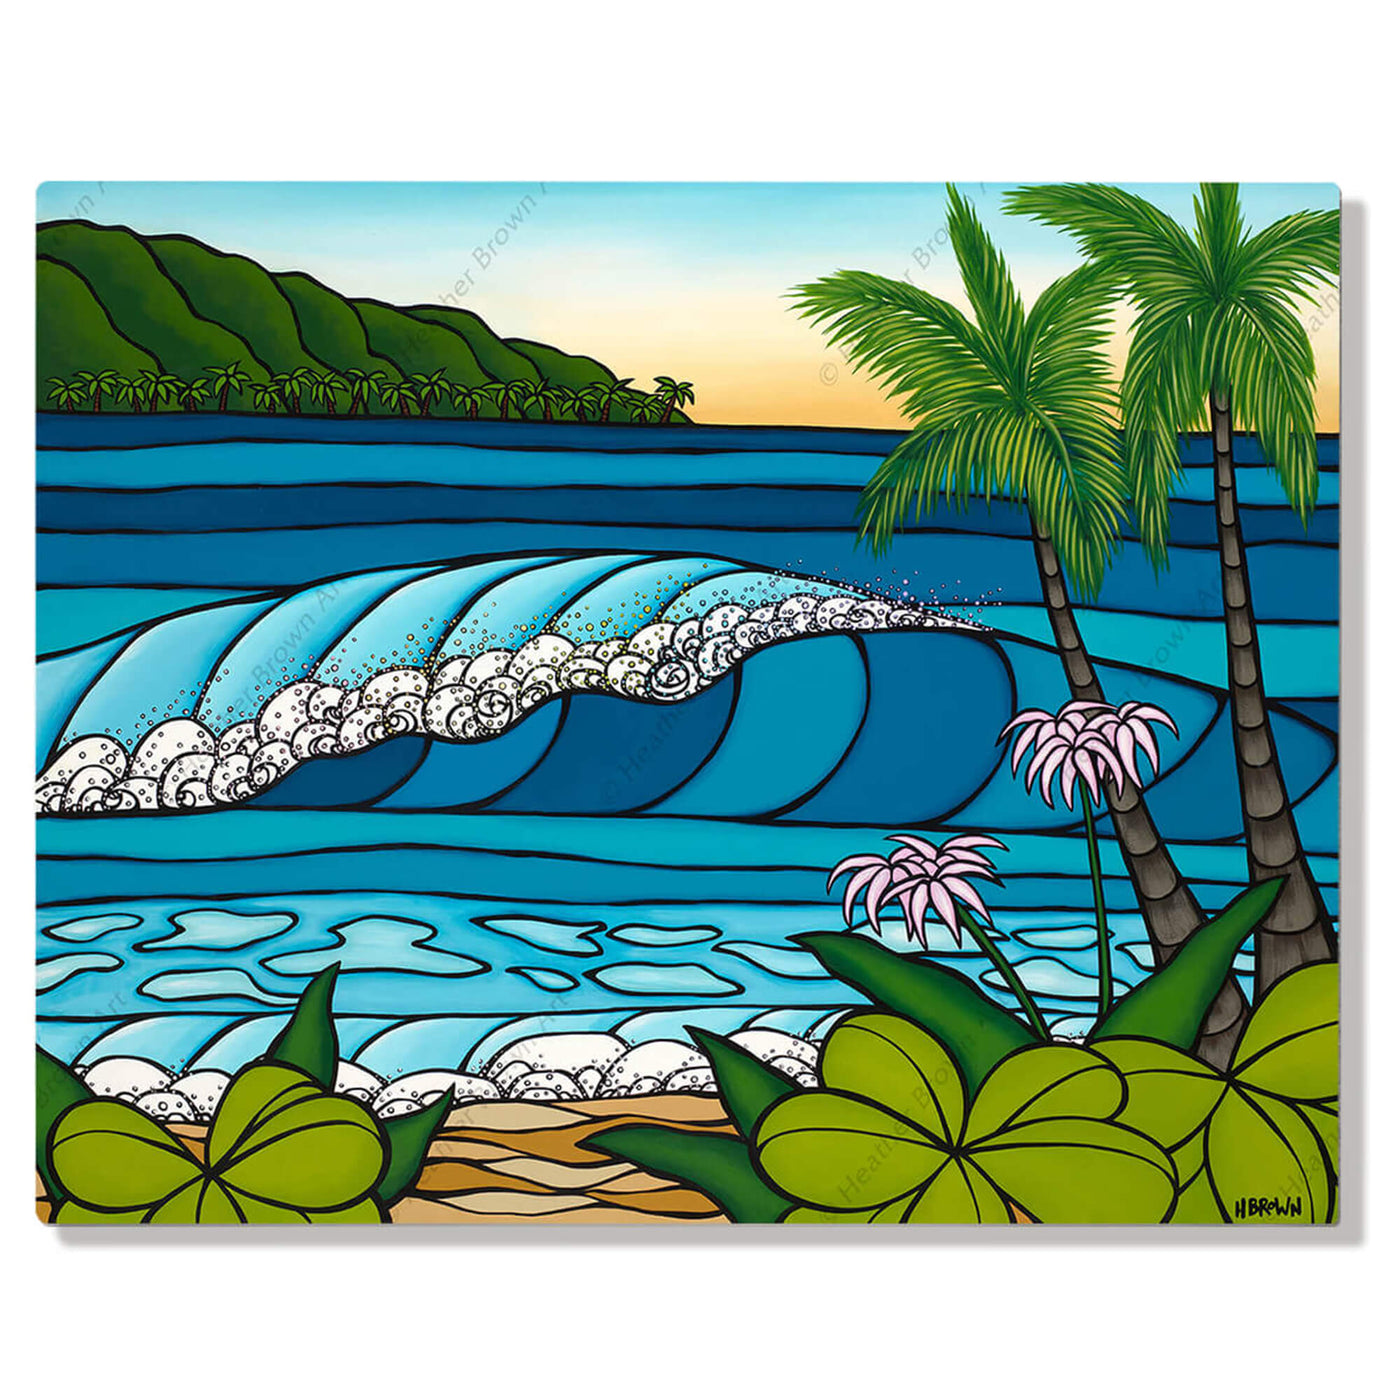 A metal art print featuring a wave-catching rainbows in its spray as it rolls towards the shore by Hawaii surf artist Heather Brown